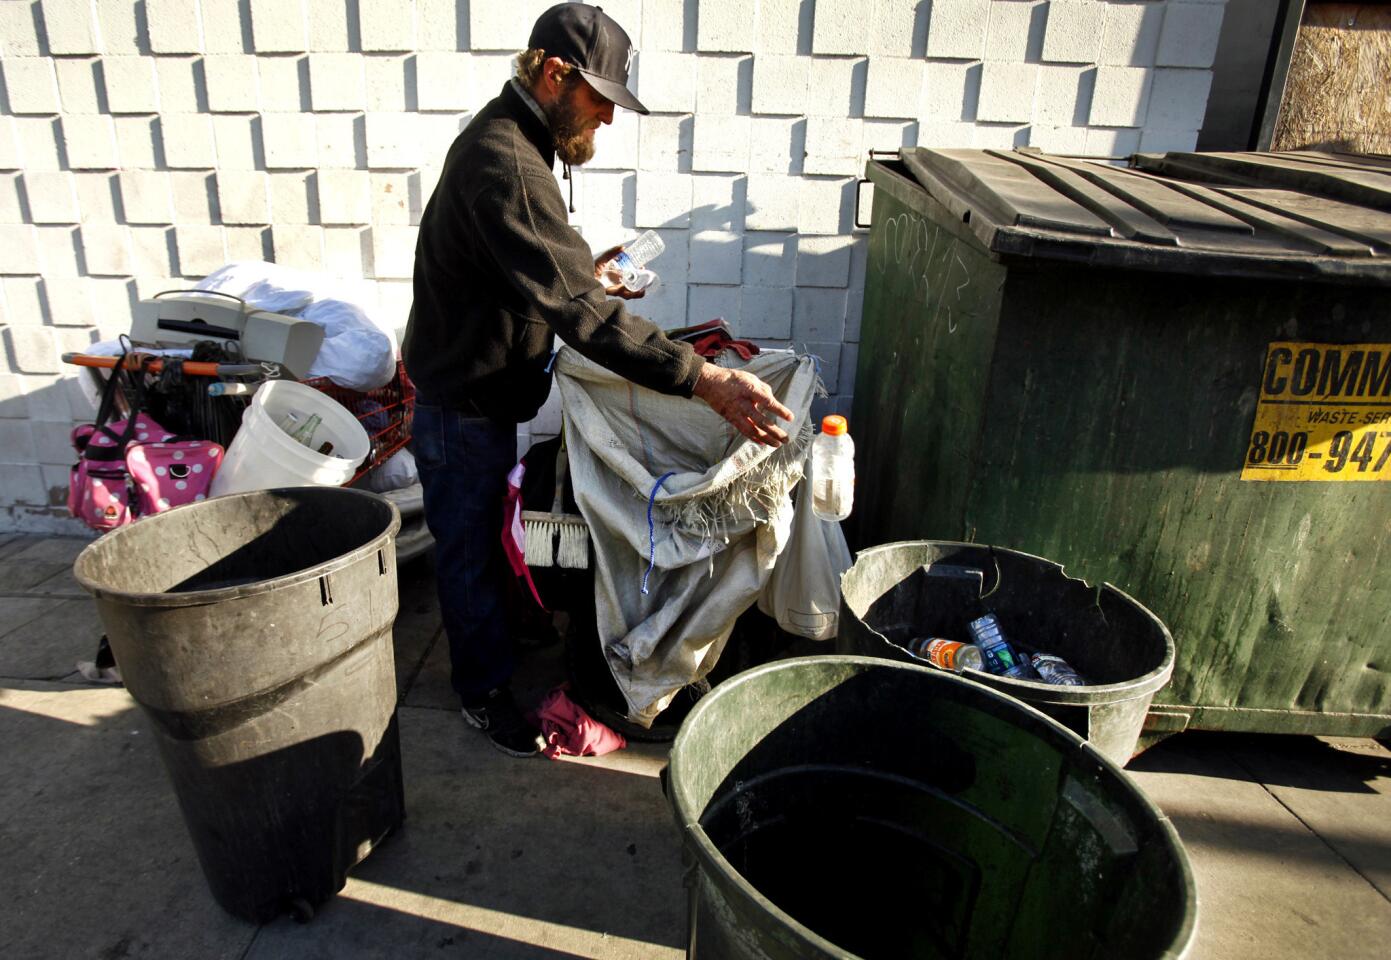 Recyclers take an income hit